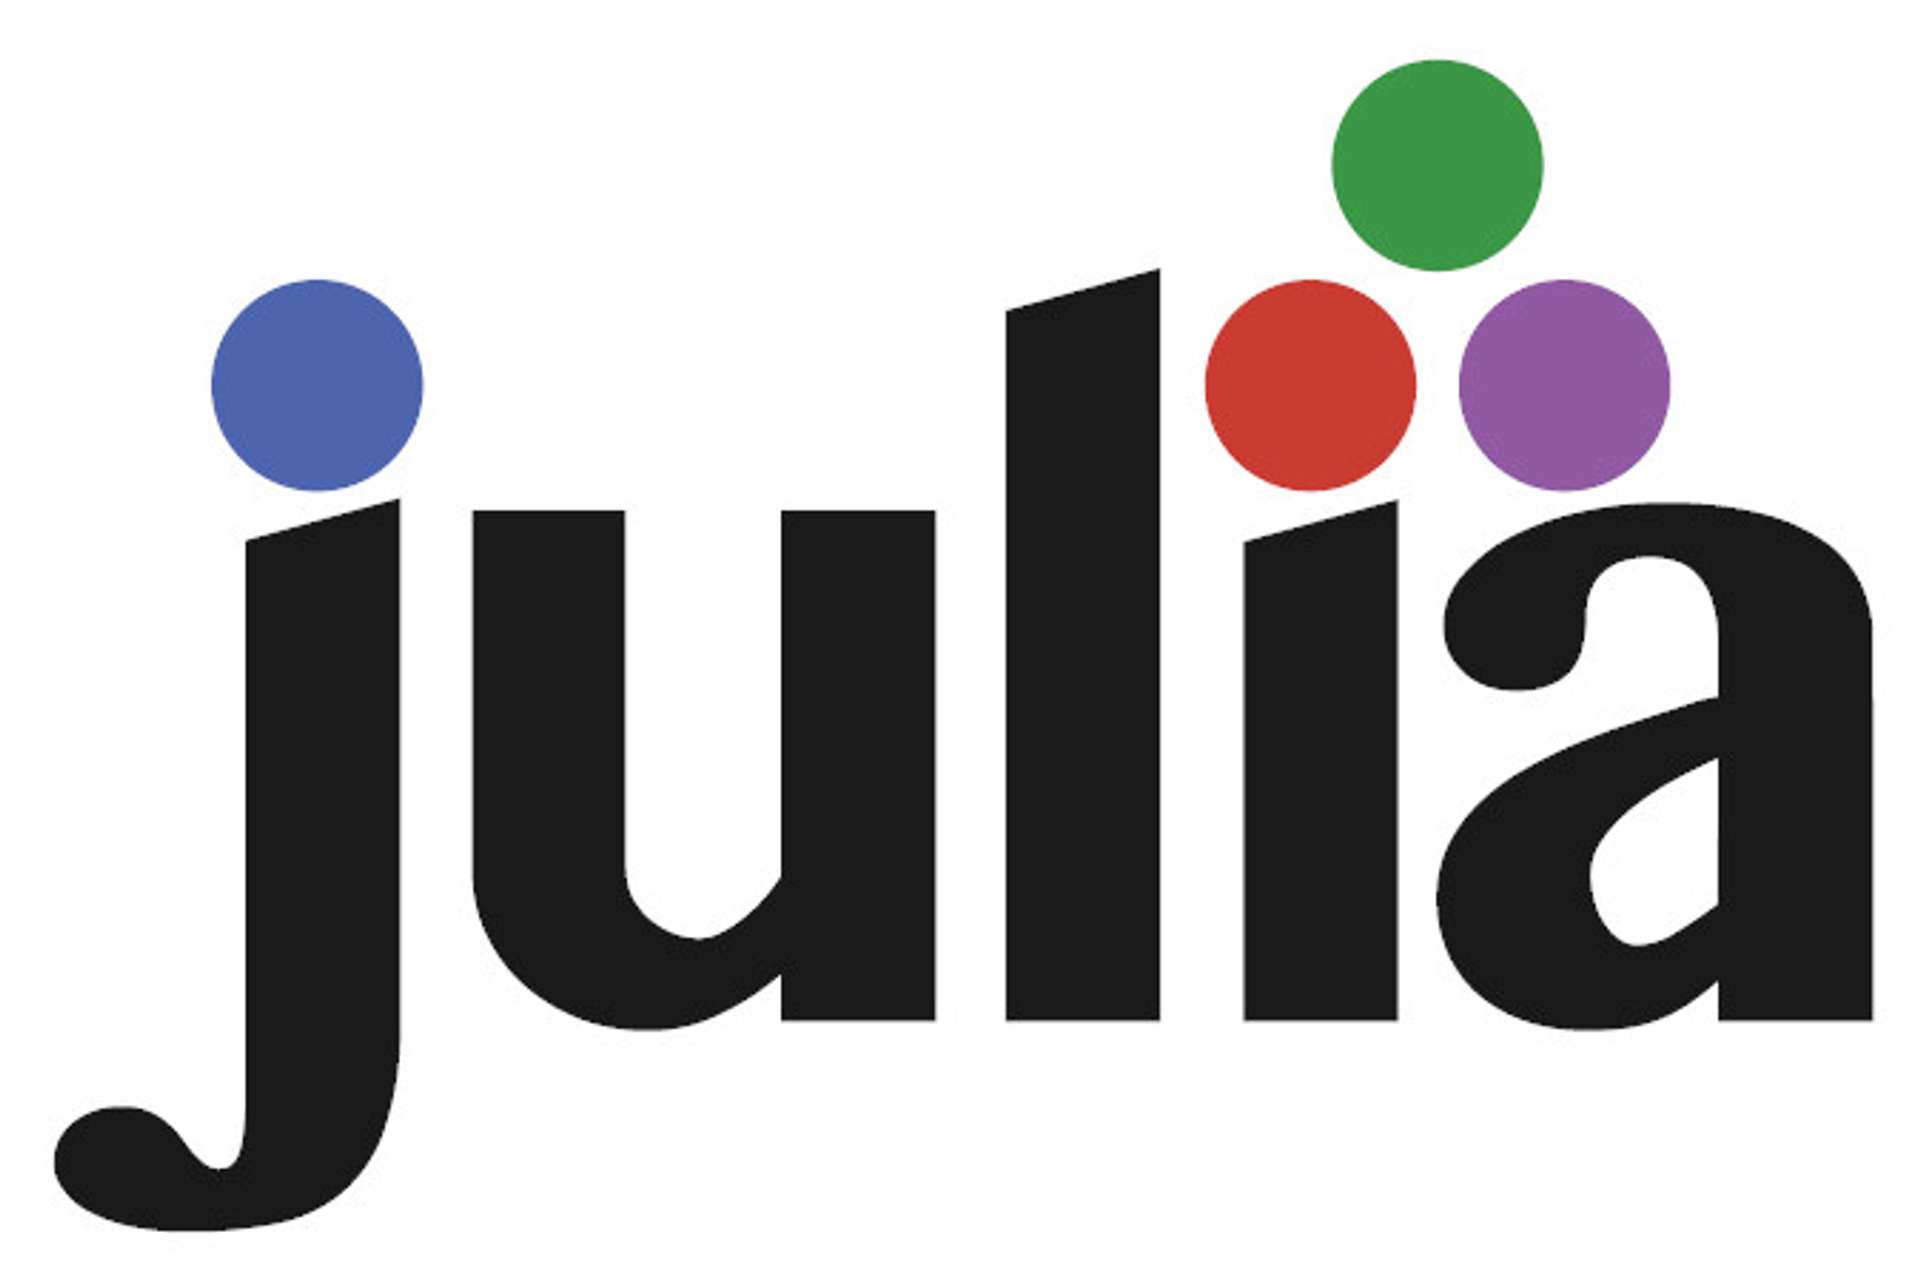 Noteworthy differences between Julia and other languages